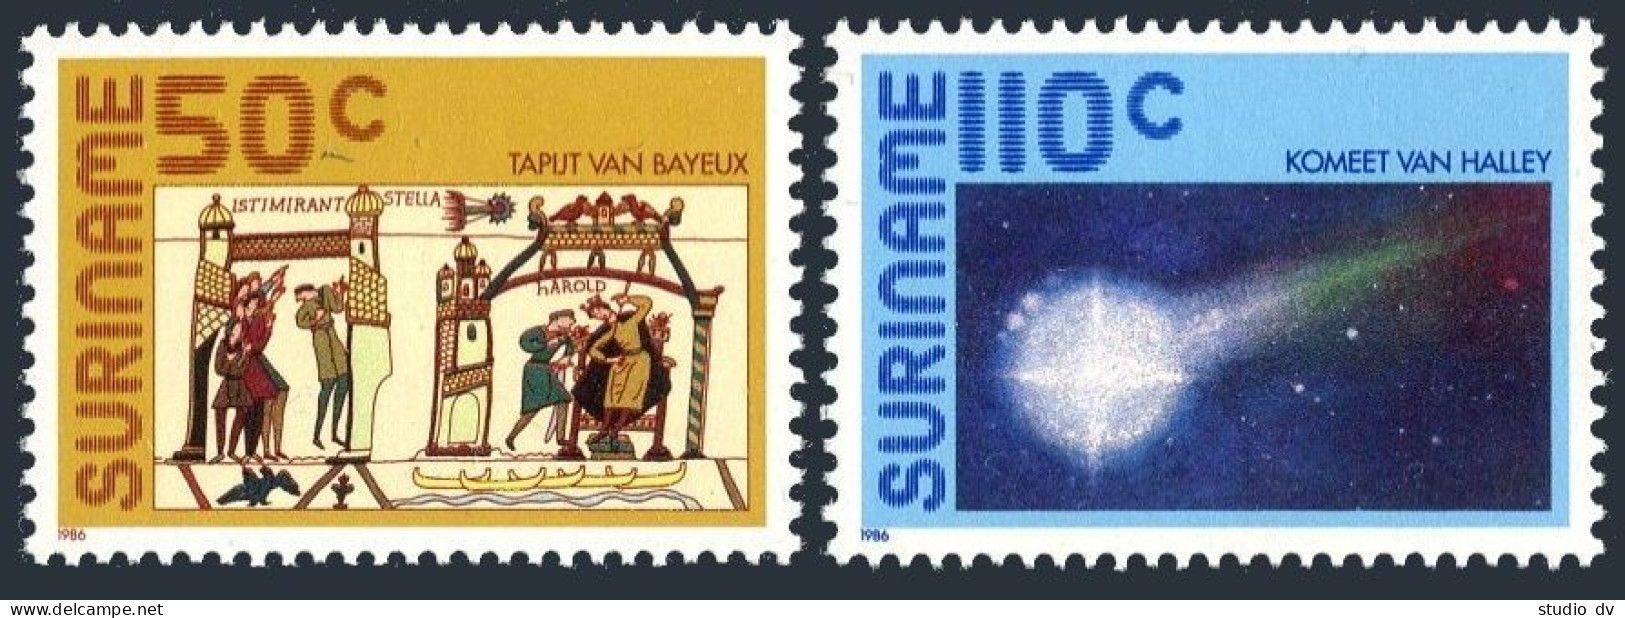 Surinam 747-748, MNH. Mi 1170-1171. Halley's Comet, 1986. The Bayeux Tapestry. - Suriname